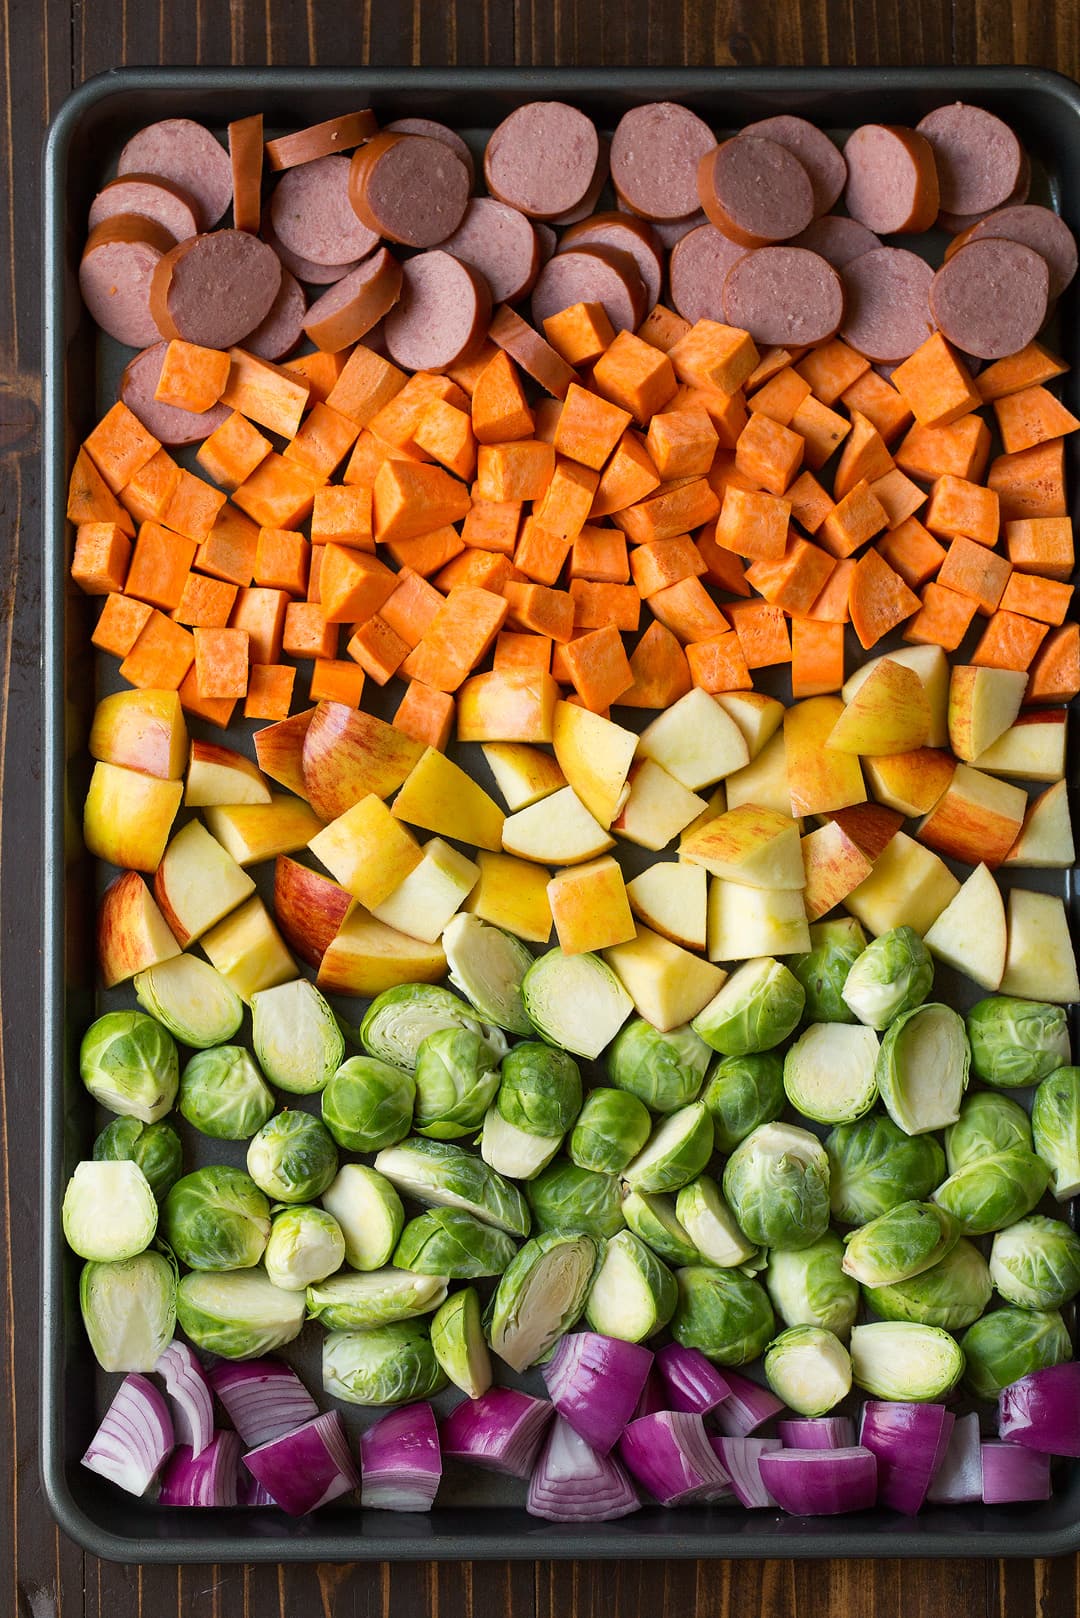 Sheet Pan Dinner with Turkey Sausage Sweet Potatoes Brussels Sprouts Apples and Red Onions